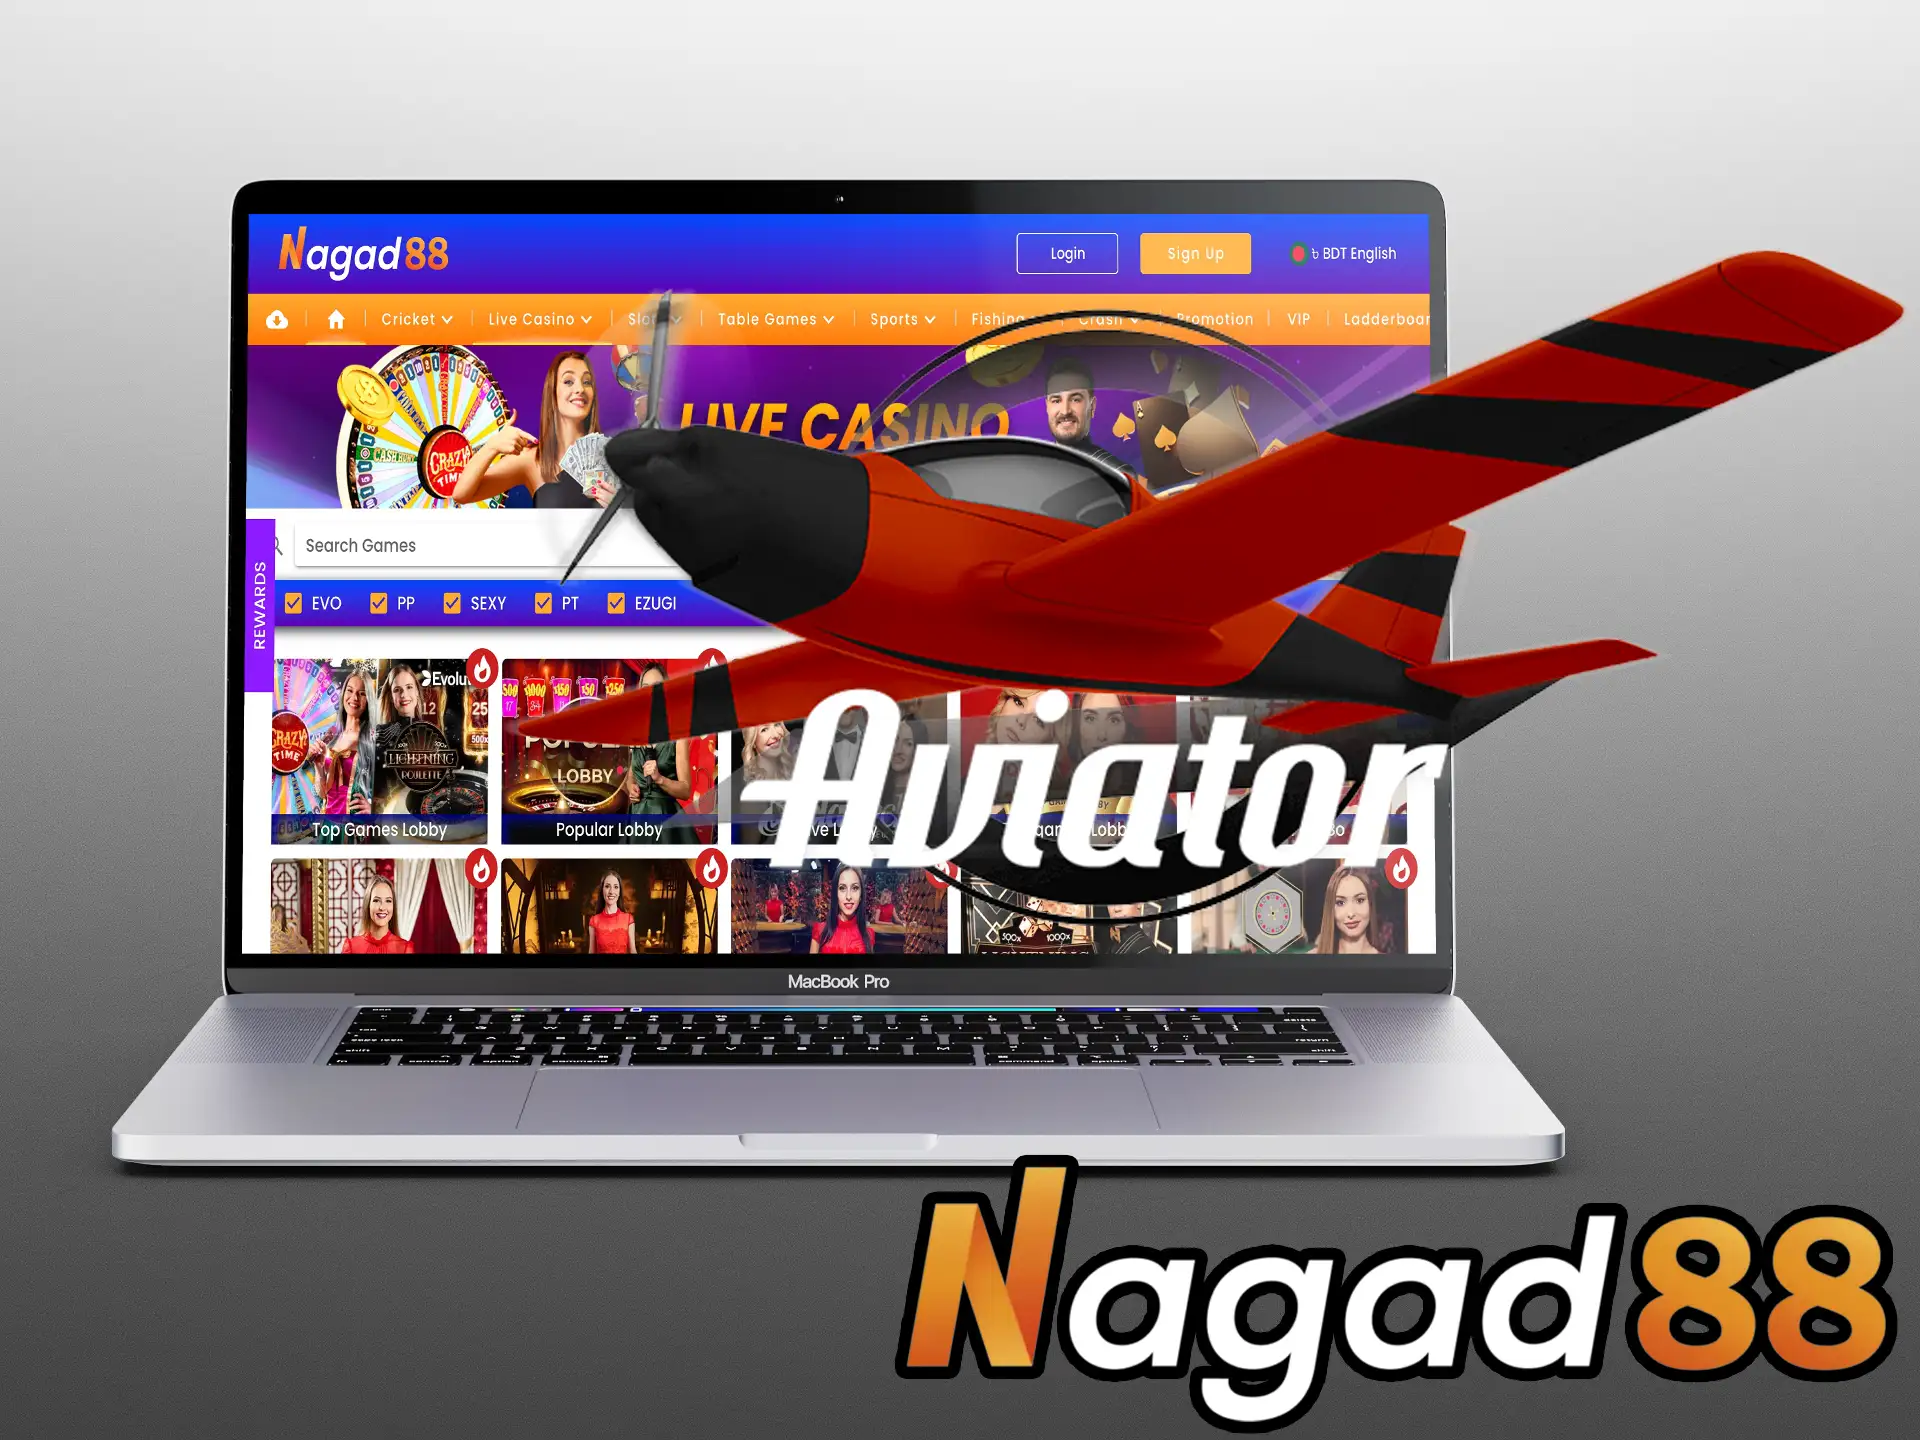 Create an account to dive headfirst into the world of flying a virtual airplane at Nagad88 Casino.